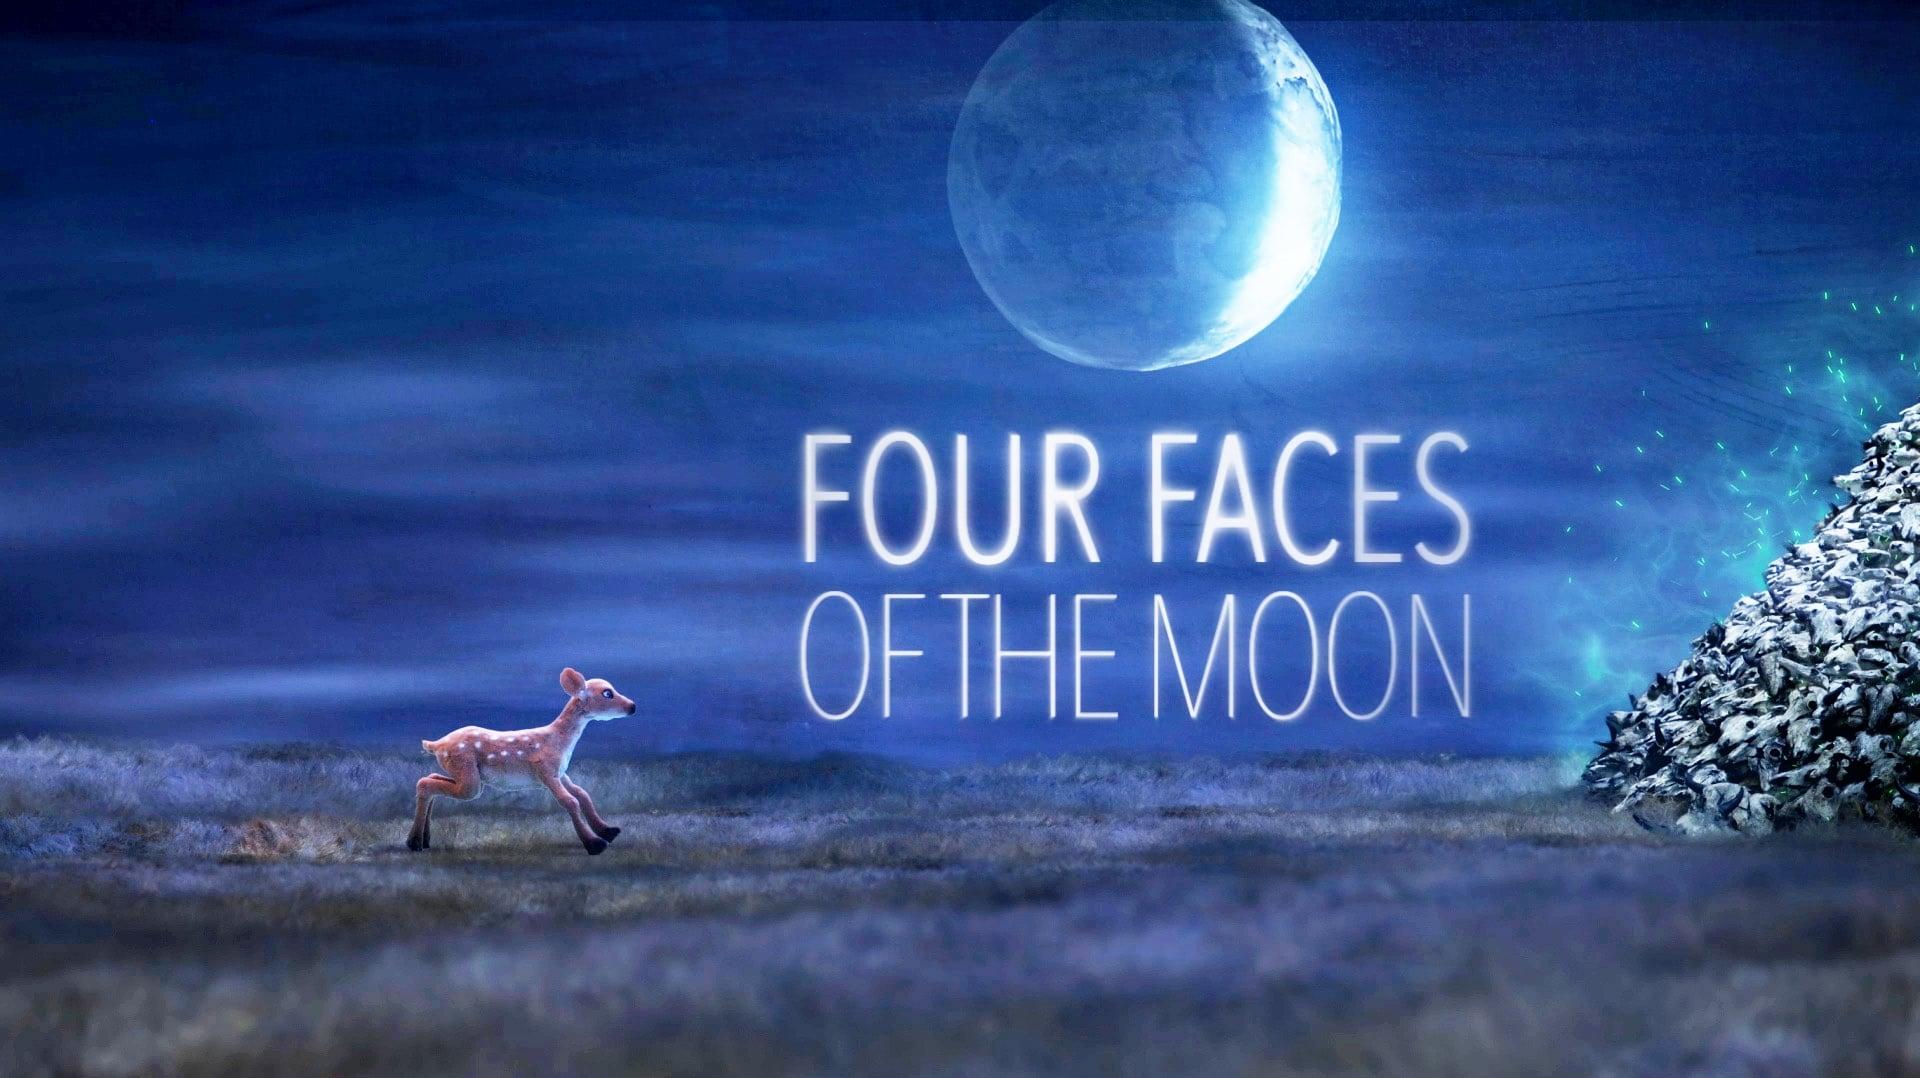 Four Faces of the Moon backdrop